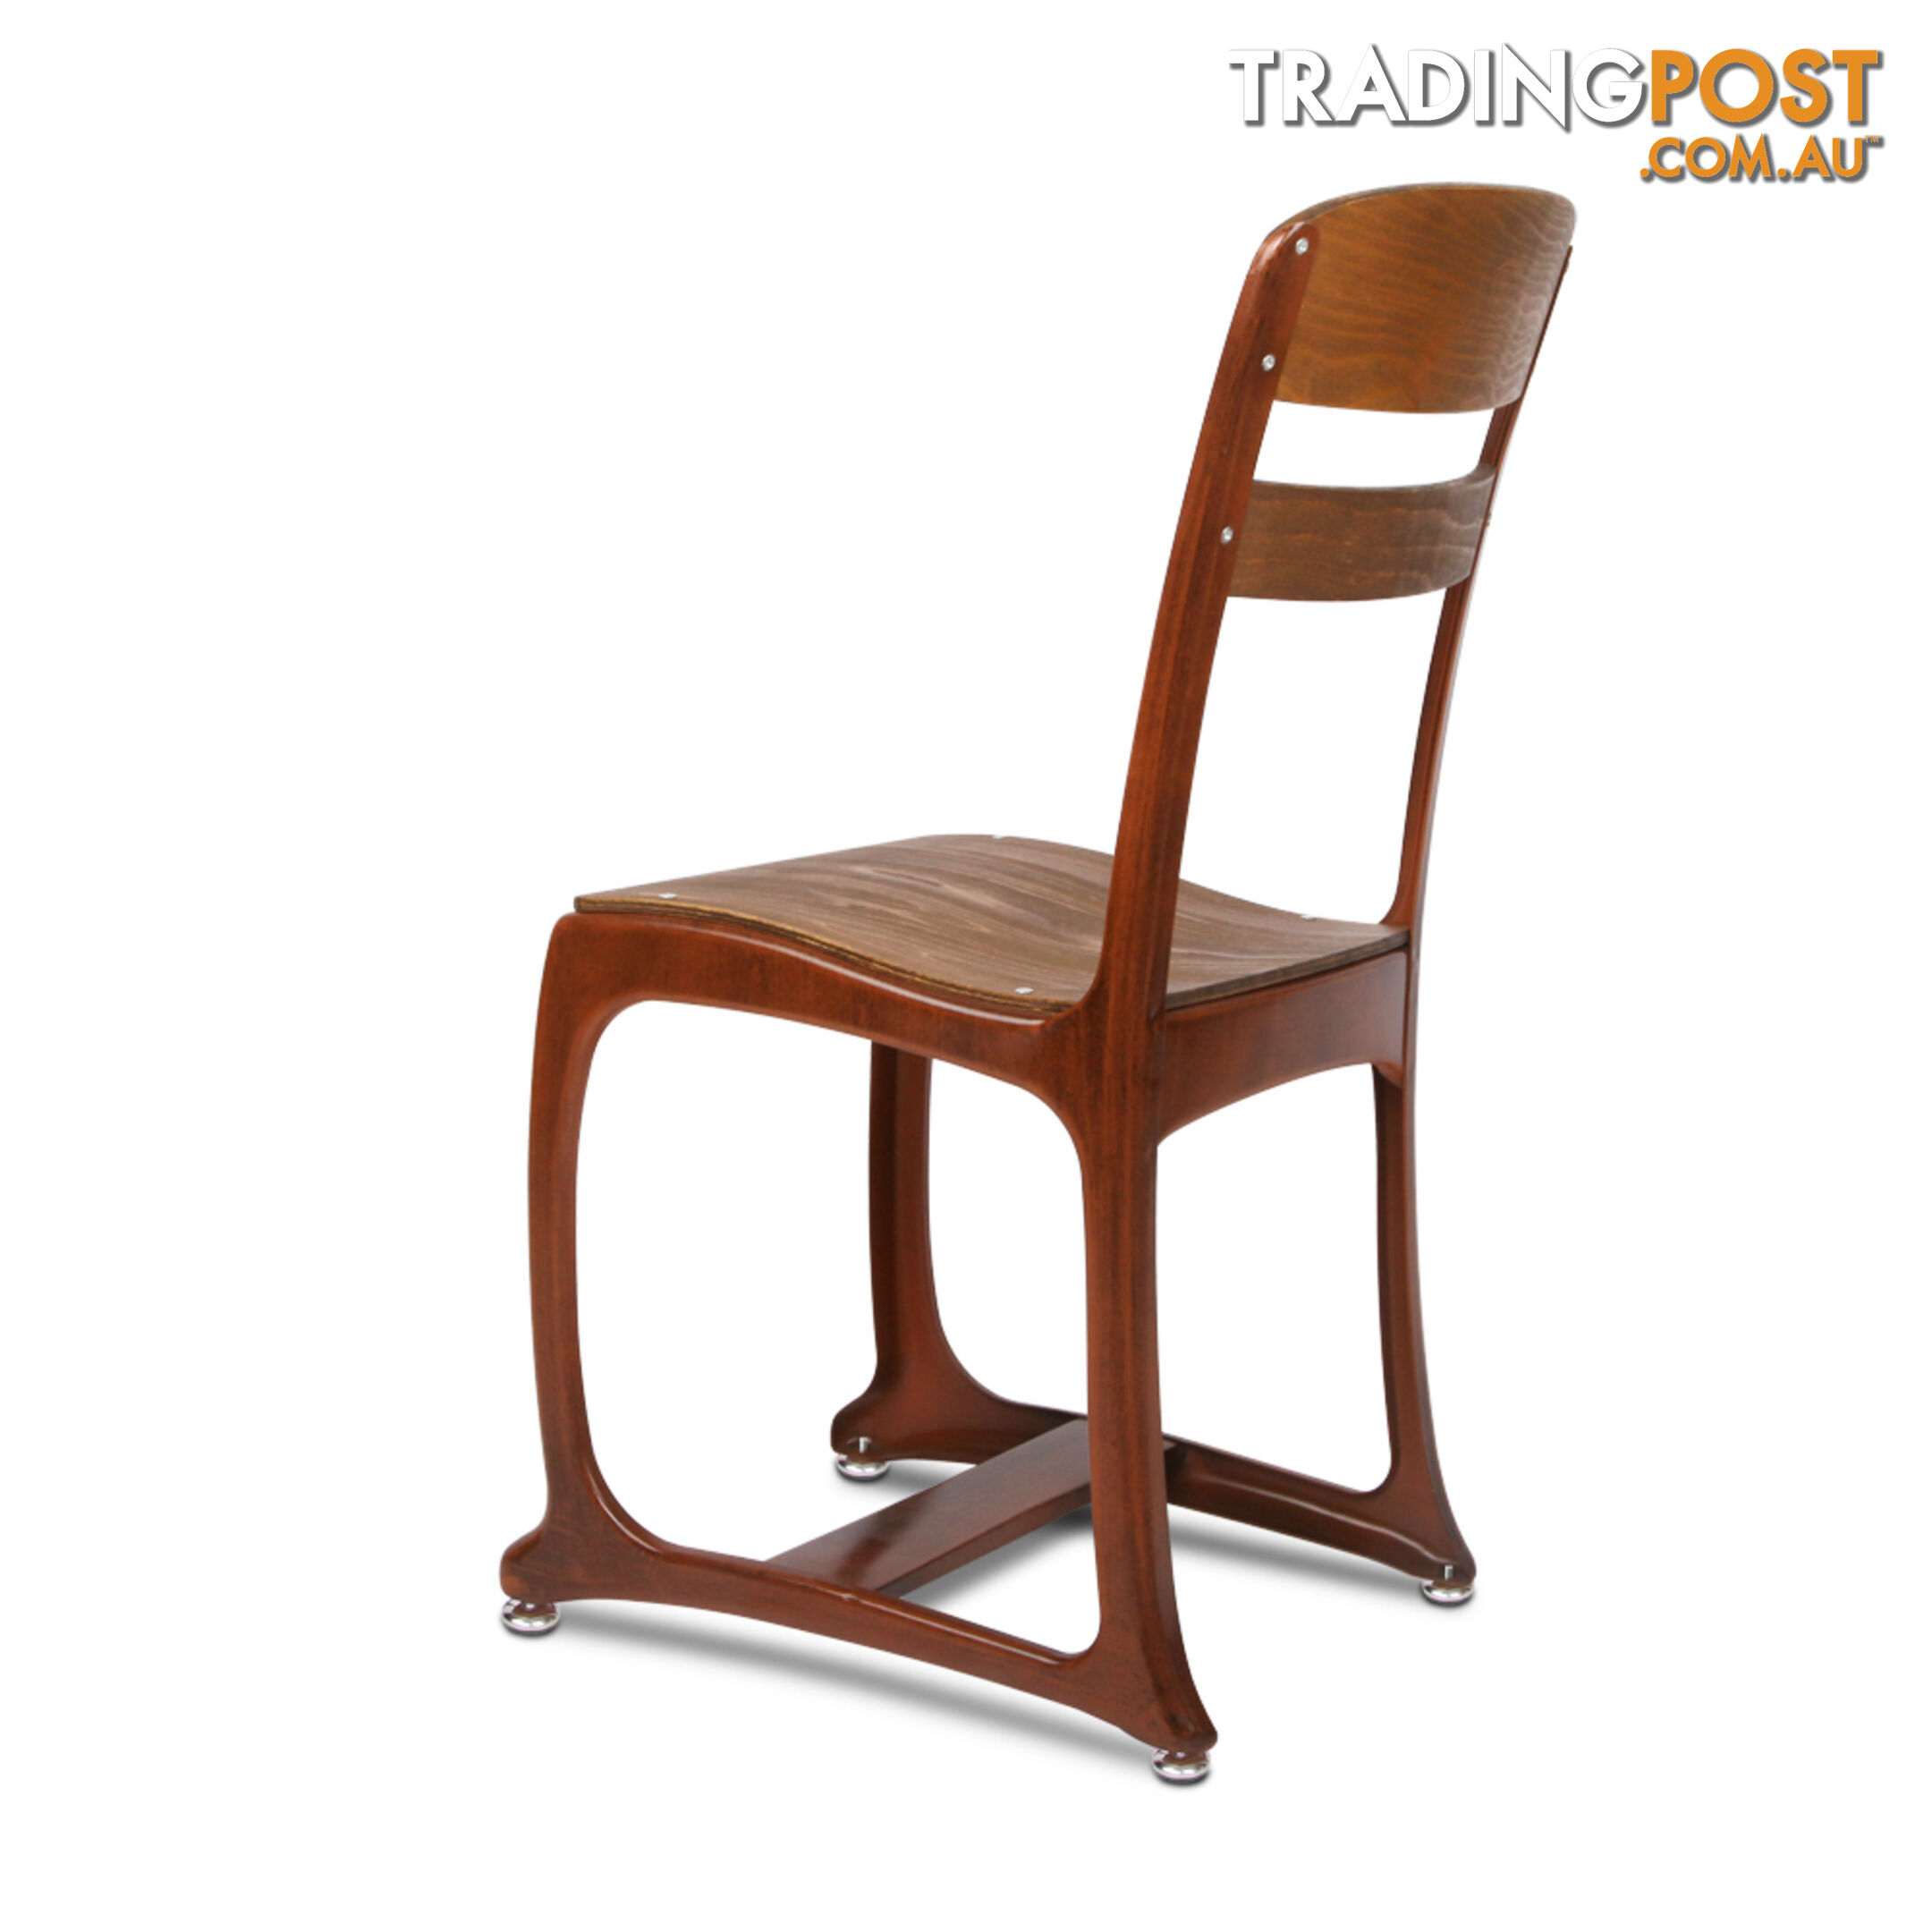 Set of 2 Replica Eton Dining Chairs - Copper